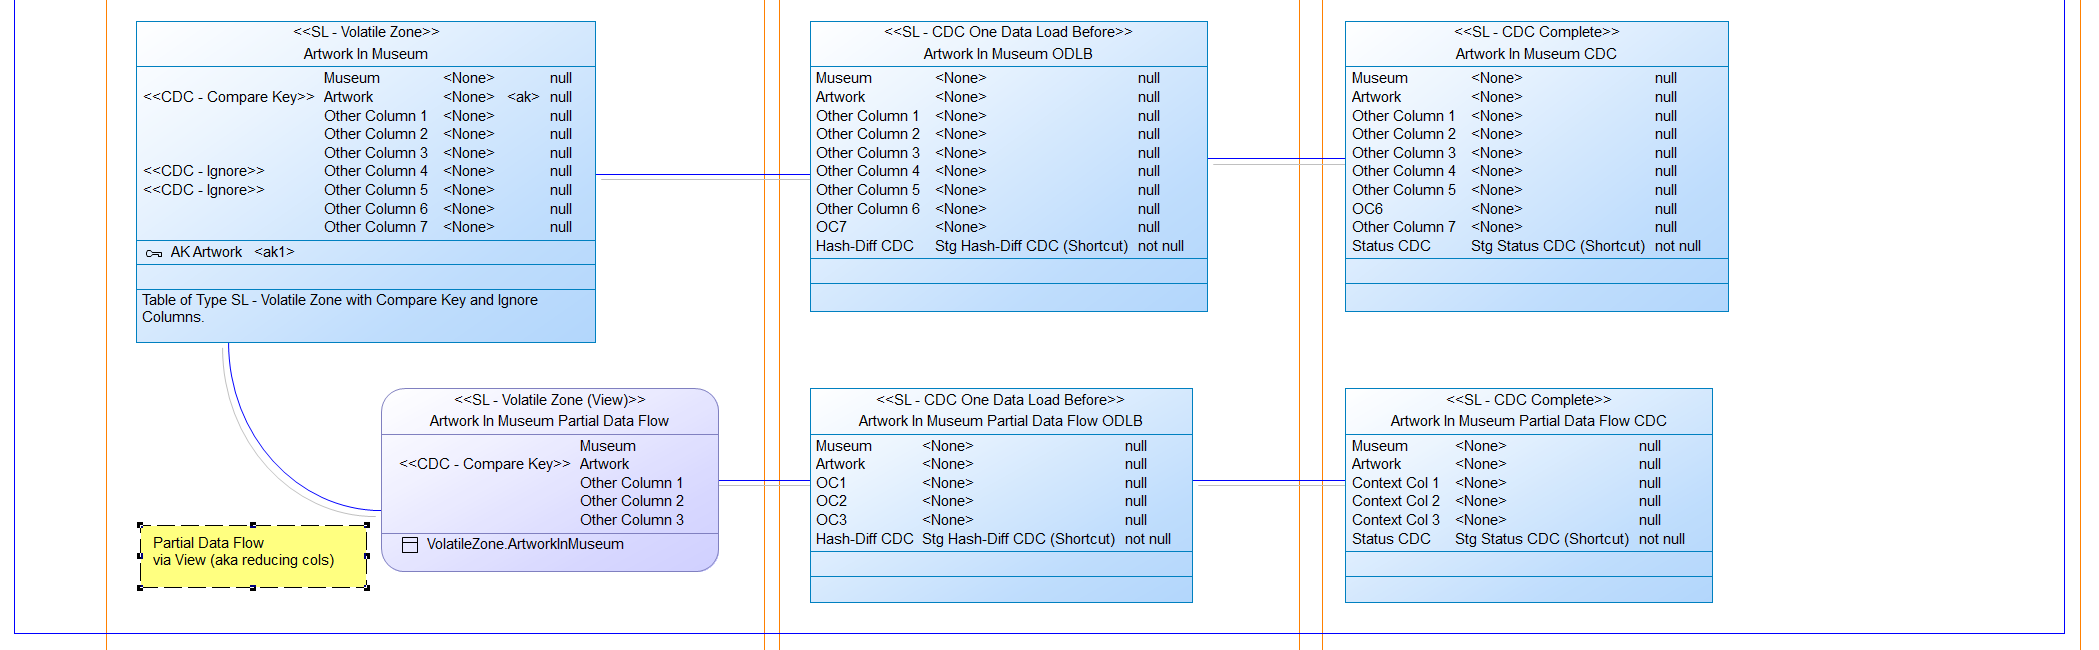 CDC Data Pipeline Stage Complete and Partial Data Flow